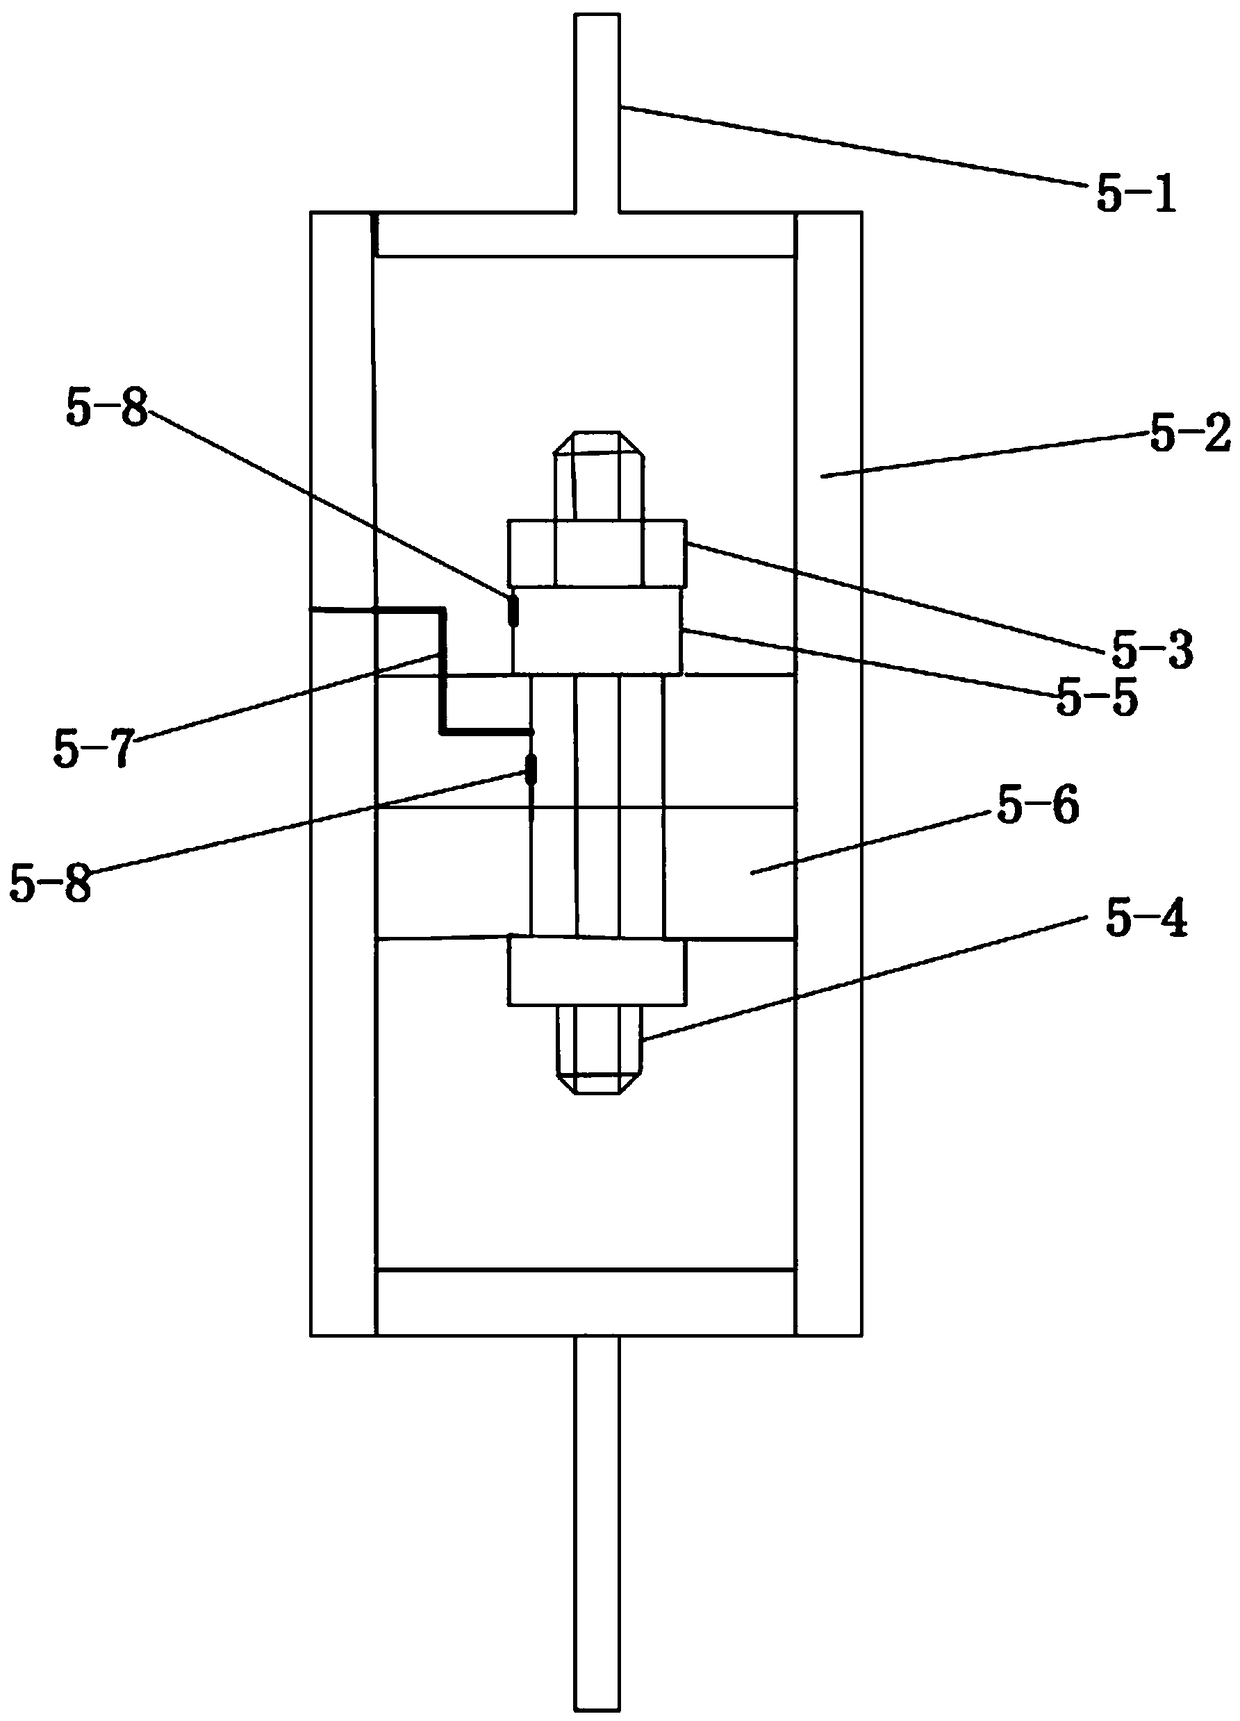 NiTi memory alloy bolt connector self-relaxation test device and method